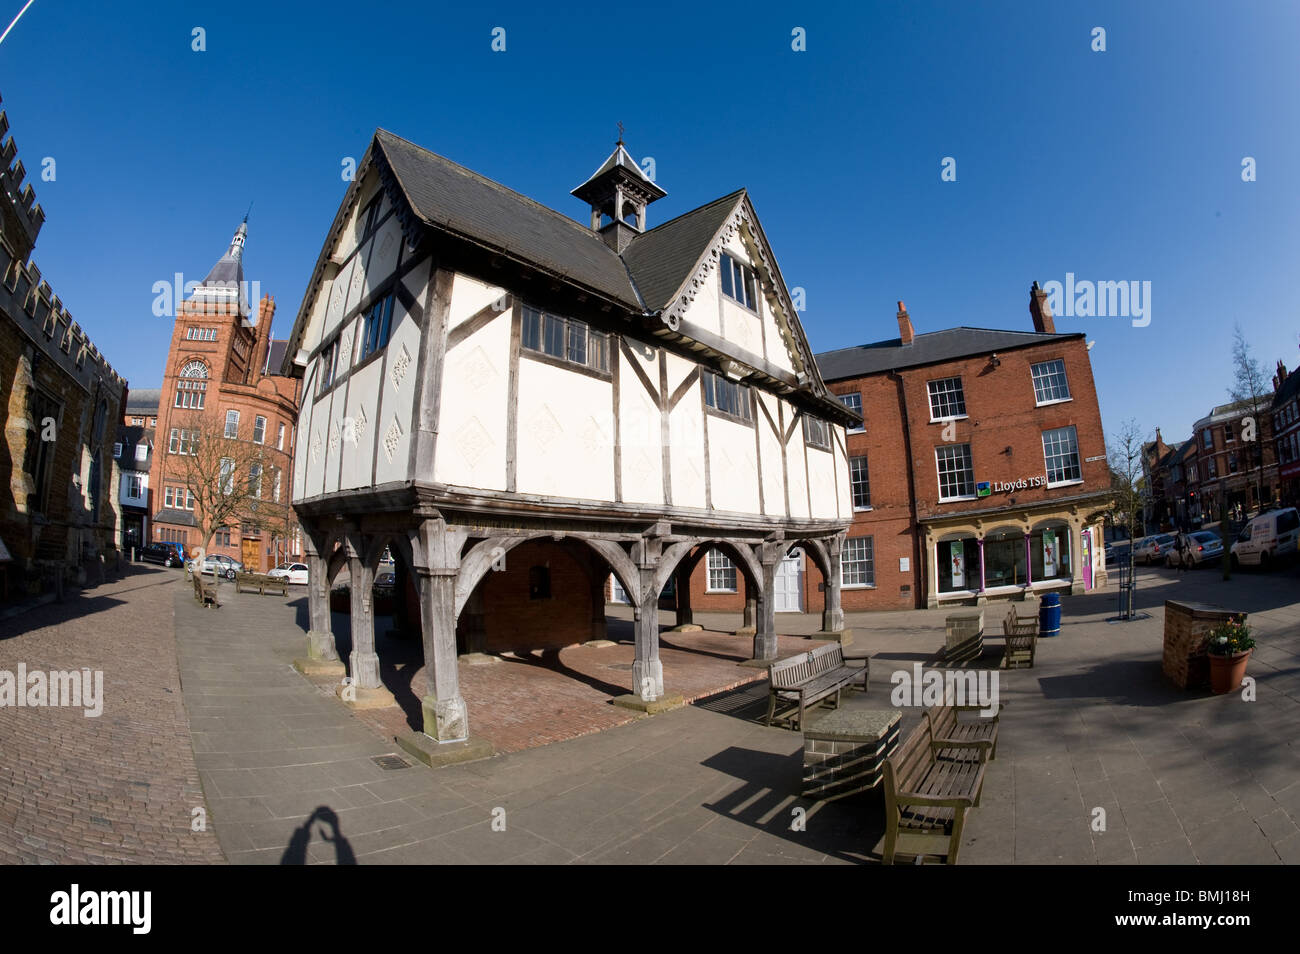 The old grammar school in the centre of the market town of Market Harborough, Leicestershire, England. Stock Photo